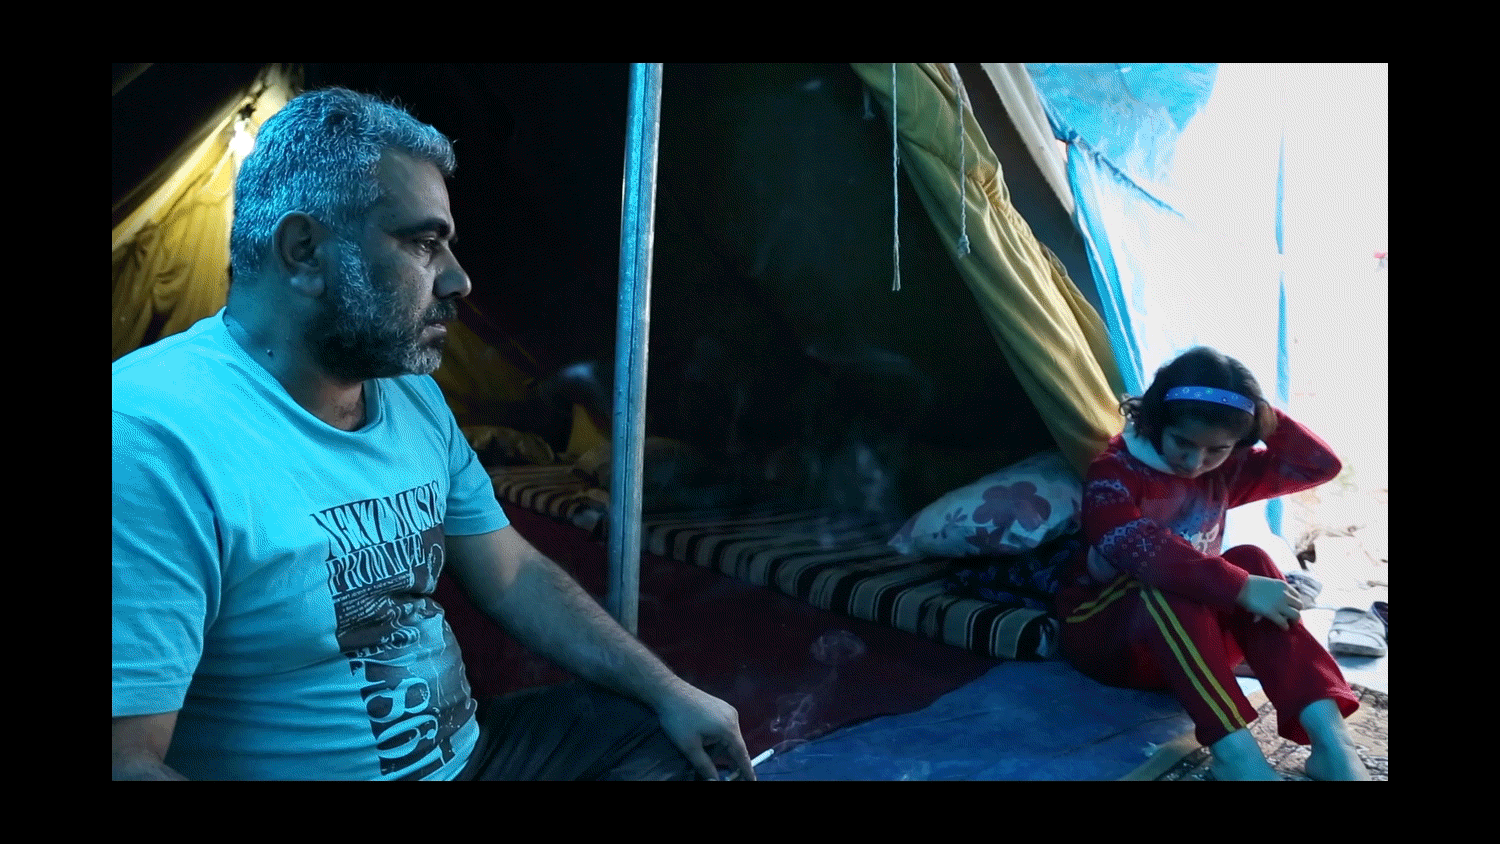  Father and daughter in their tent in the Domiz Camp for Syrian Refugees near Dohuk, Iraq. Their family fled Damascus, Syria over a year prior. 2013 